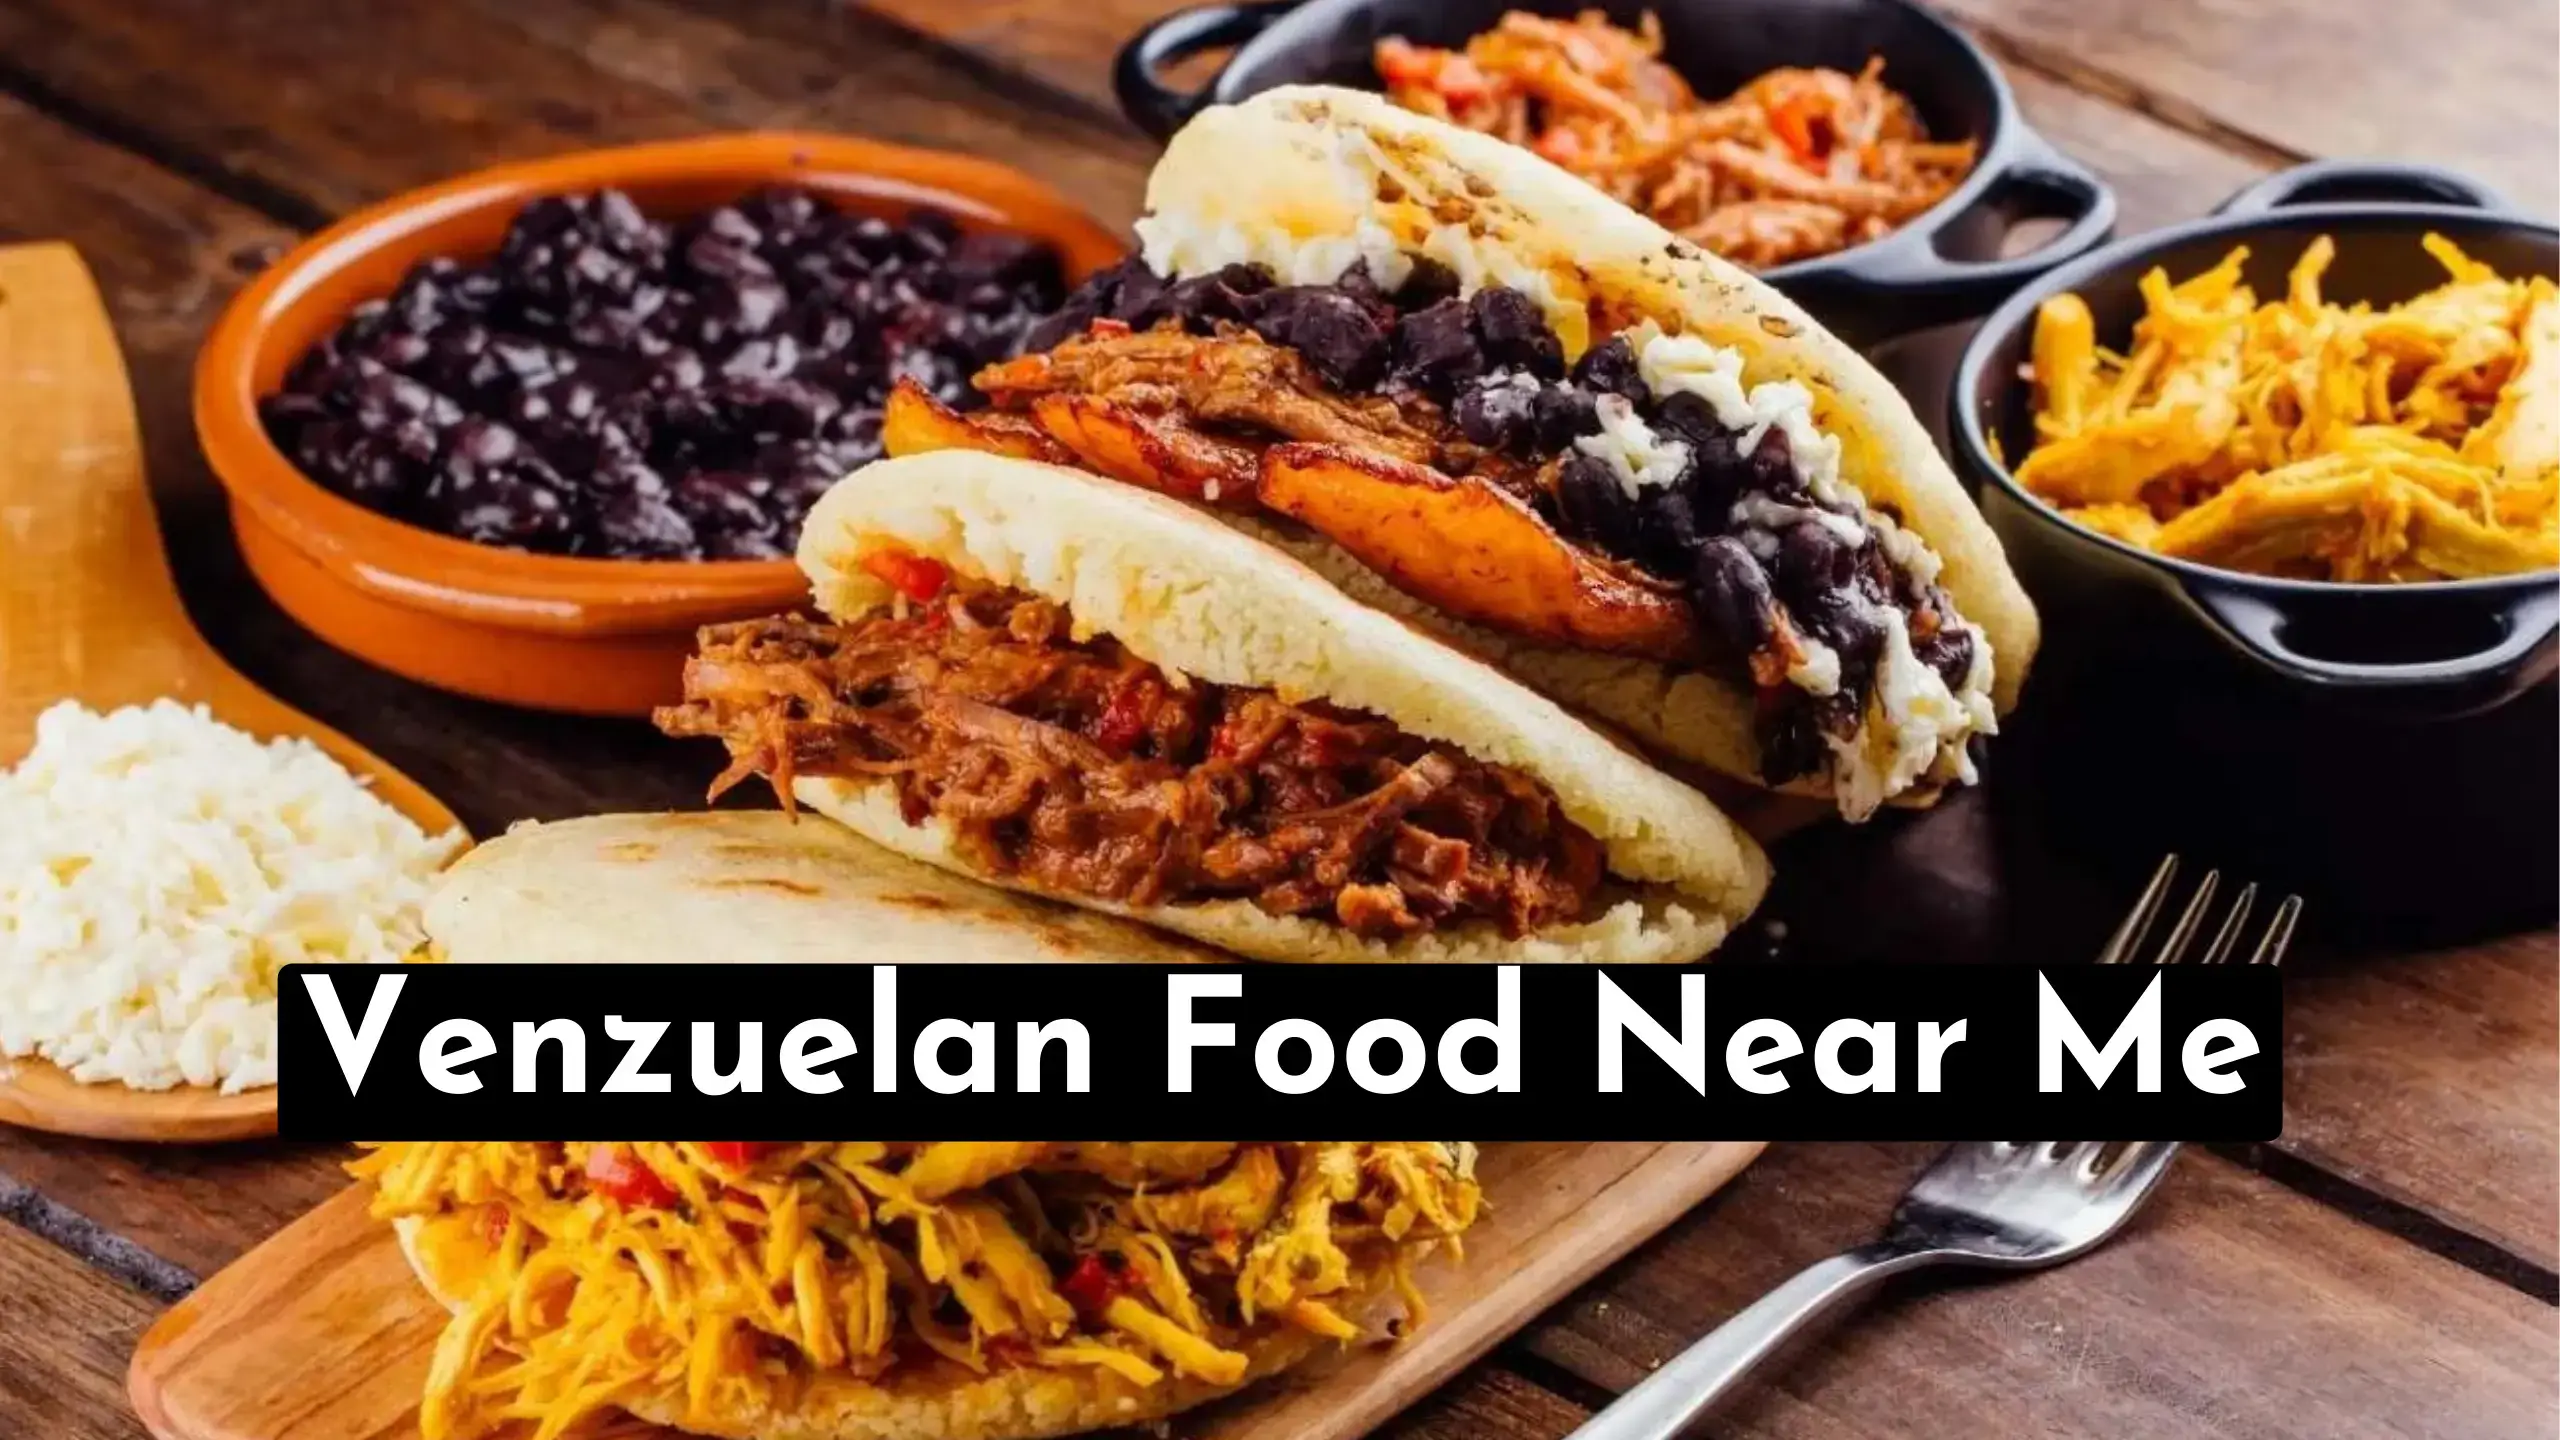 A Quick Guide To Discover Venezuelan Food Near Me Locations | Also Find The Top Venezuelan Dishes With Its Health Benefits | open-near-me.com